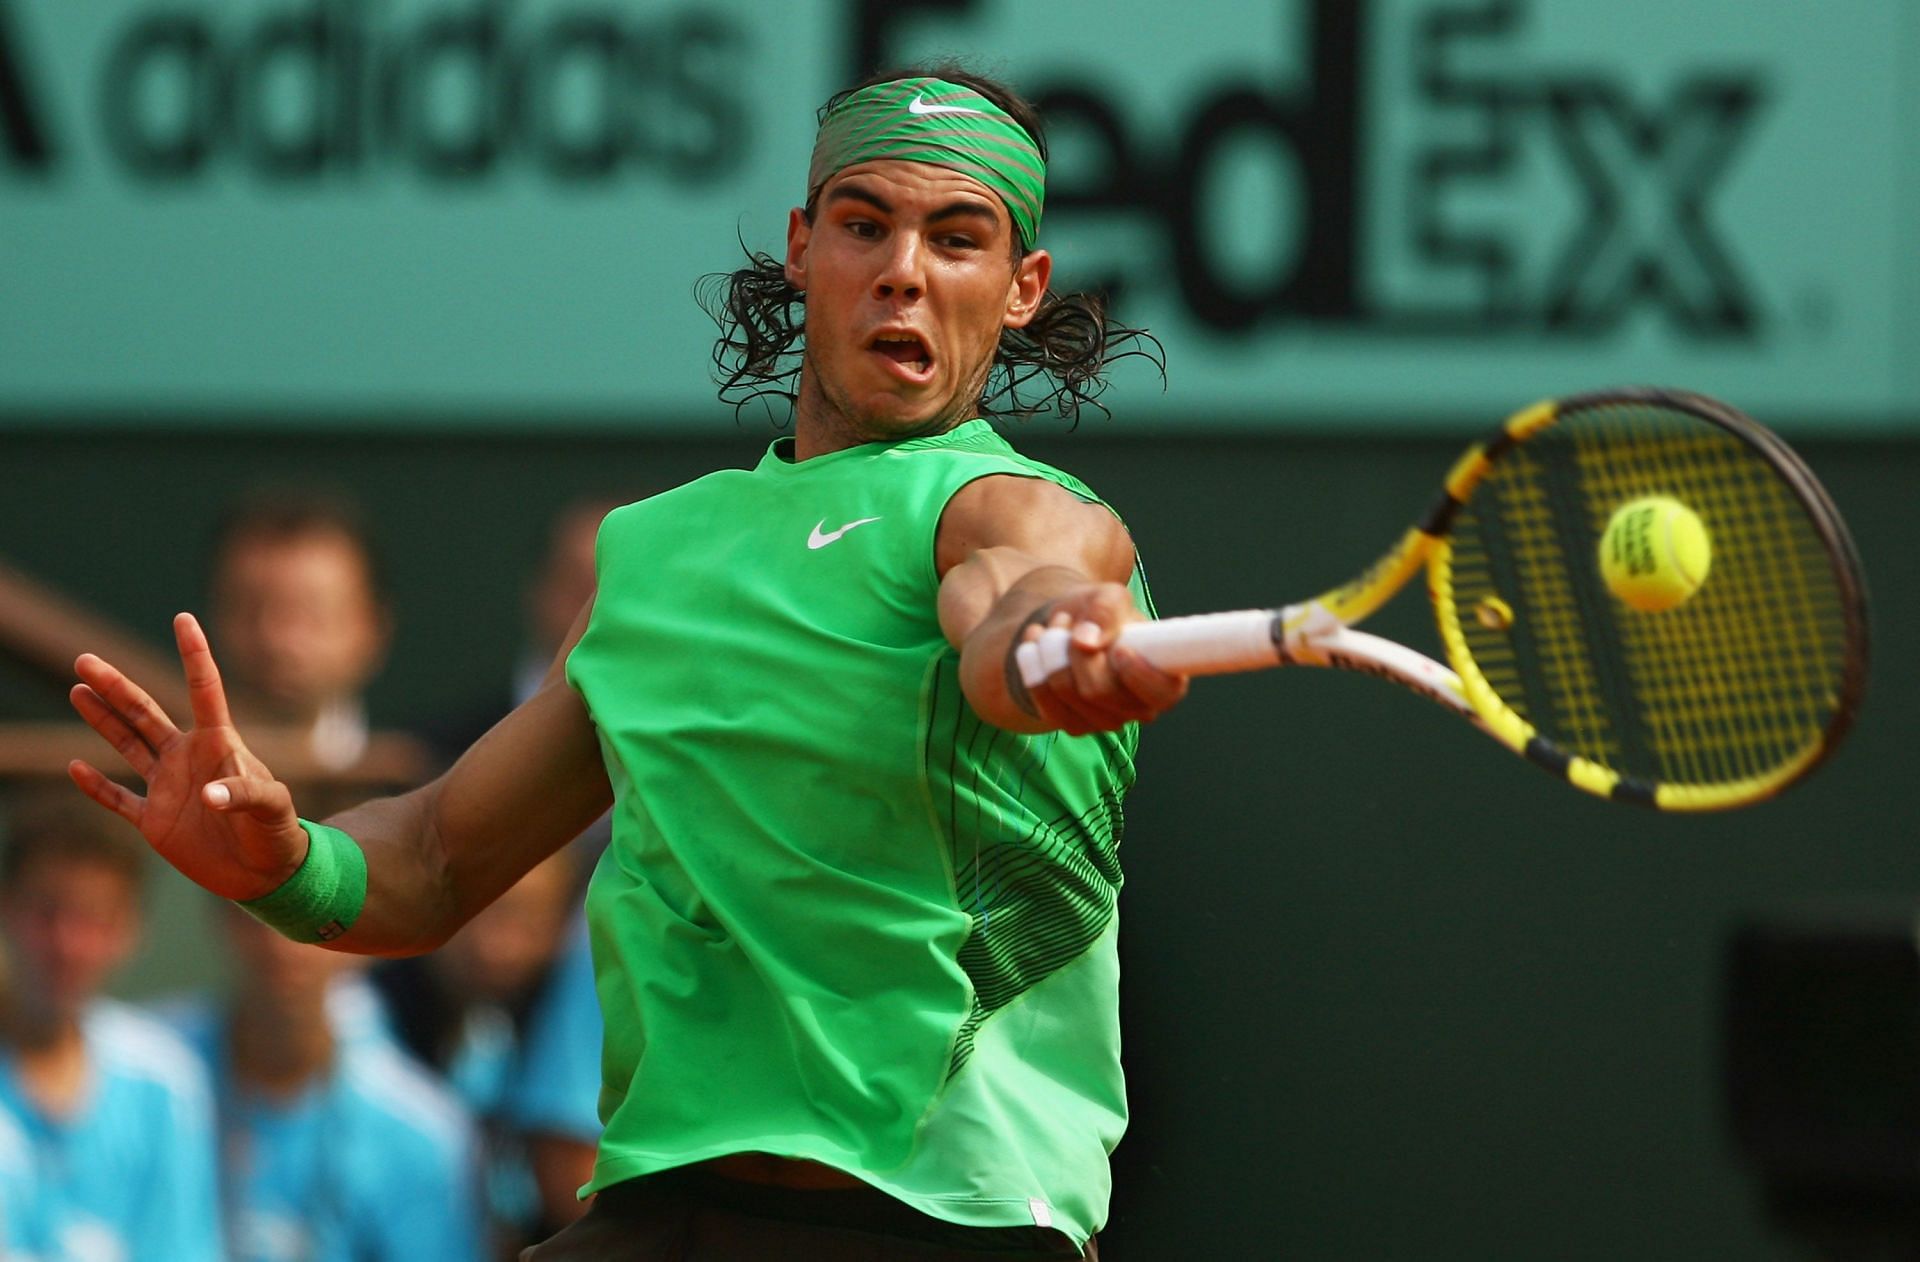 Rafael Nadal went to beat Roger Federer in the next nine of their 10 matches played on clay